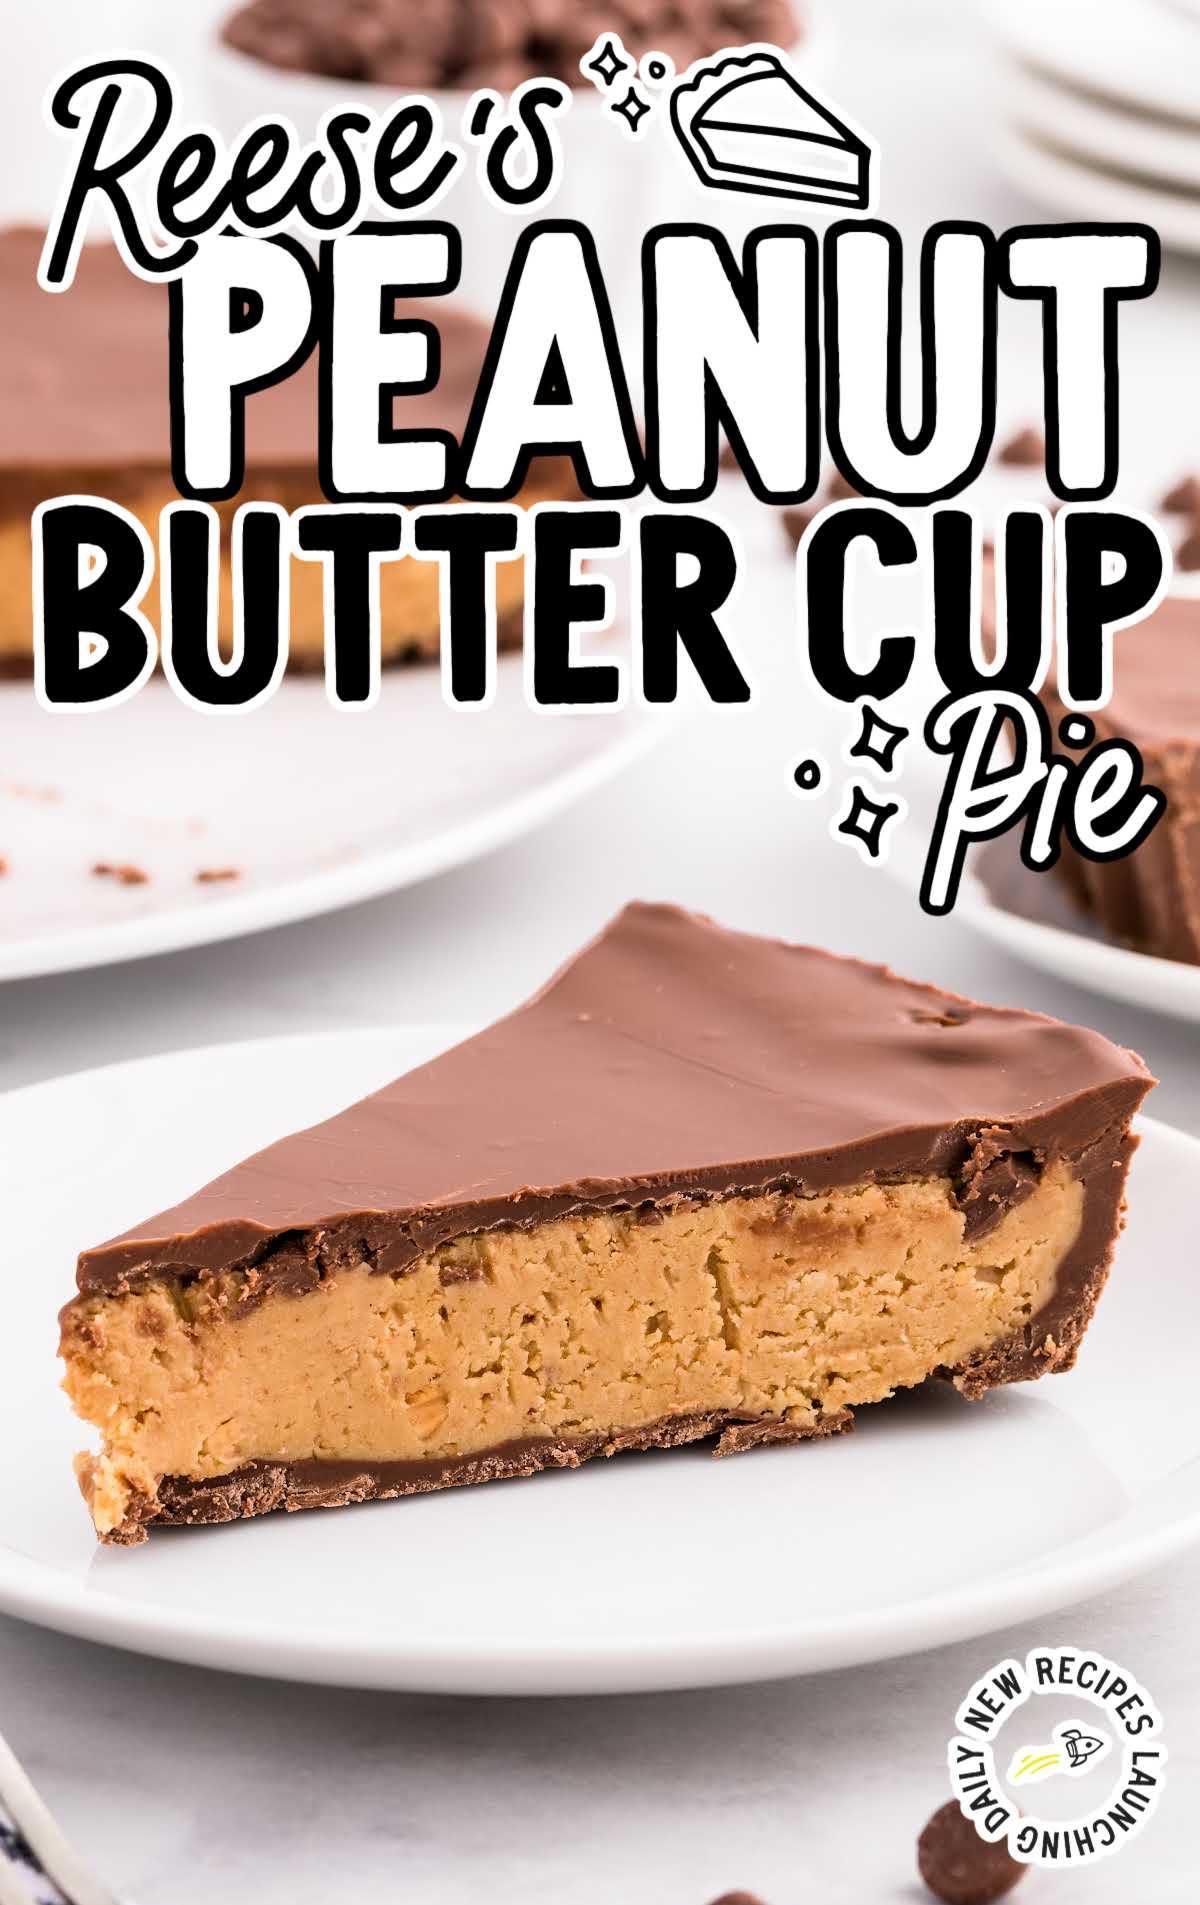 close up shot of a slice of Reese's Peanut Butter Cup Pie on a plate